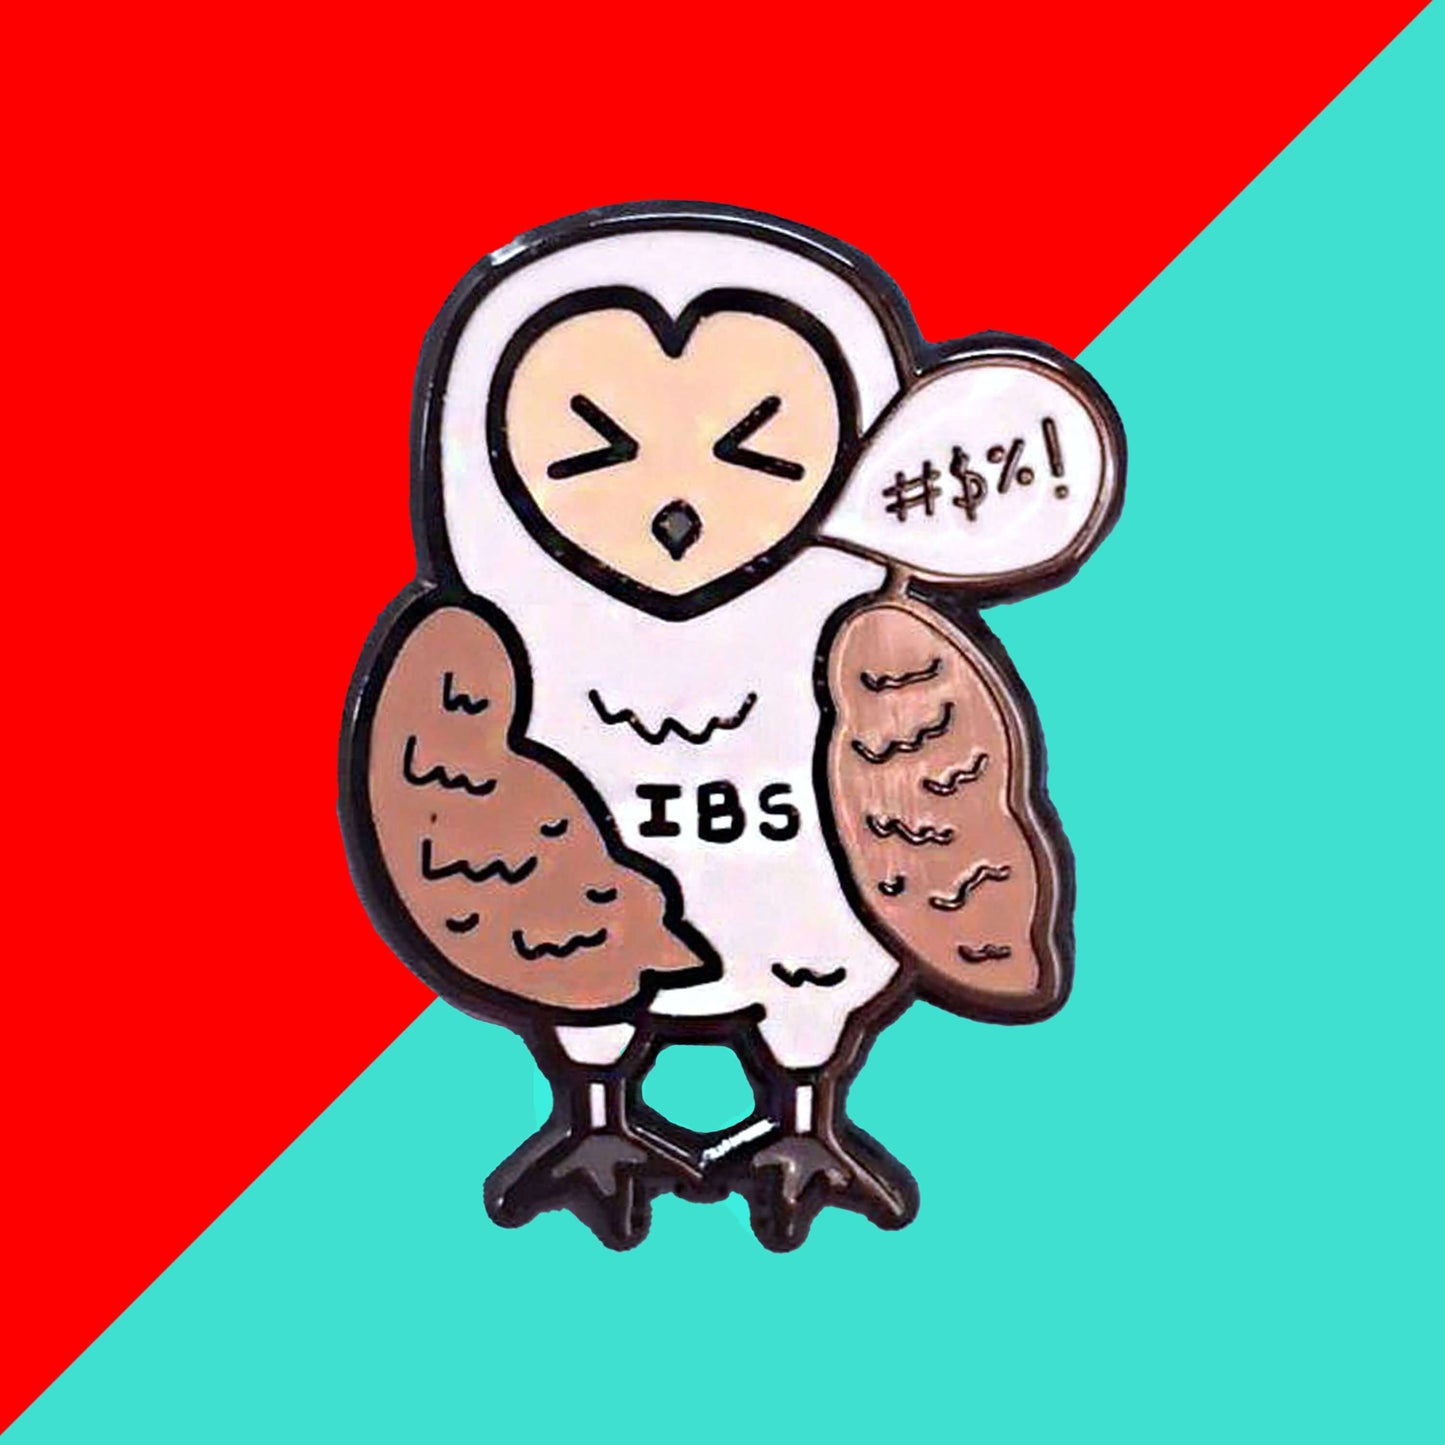 Irritable Owl Syndrome Enamel Pin - Irritable bowel syndrome (IBS) on a red and blue background. The enamel pin is of a barn owl with a sweary text speech bubble and has its eyes shut with the letters IBS written on its belly. Hand drawn design to raise awareness for Irritable bowel syndrome (IBS)